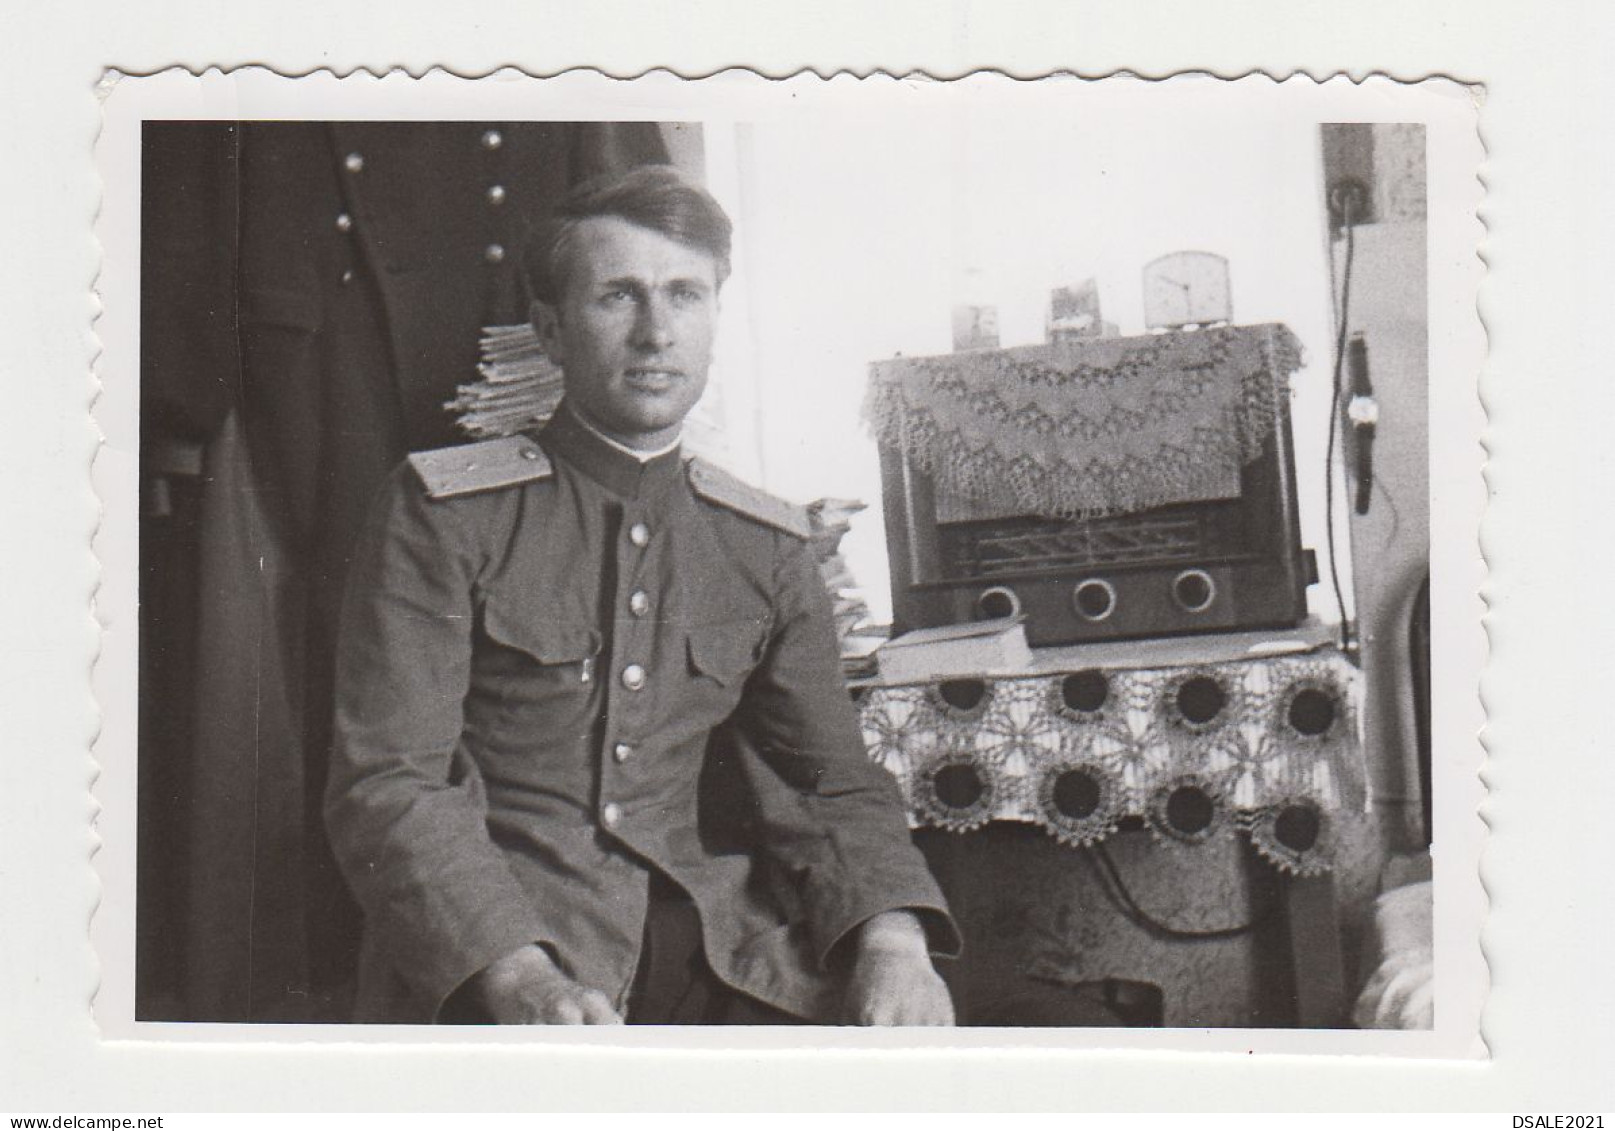 Man Military Officer With Uniform Pose To Old Tube Radio, Portrait, Vintage Orig Photo 8.7x6.1cm. (20042) - Guerre, Militaire